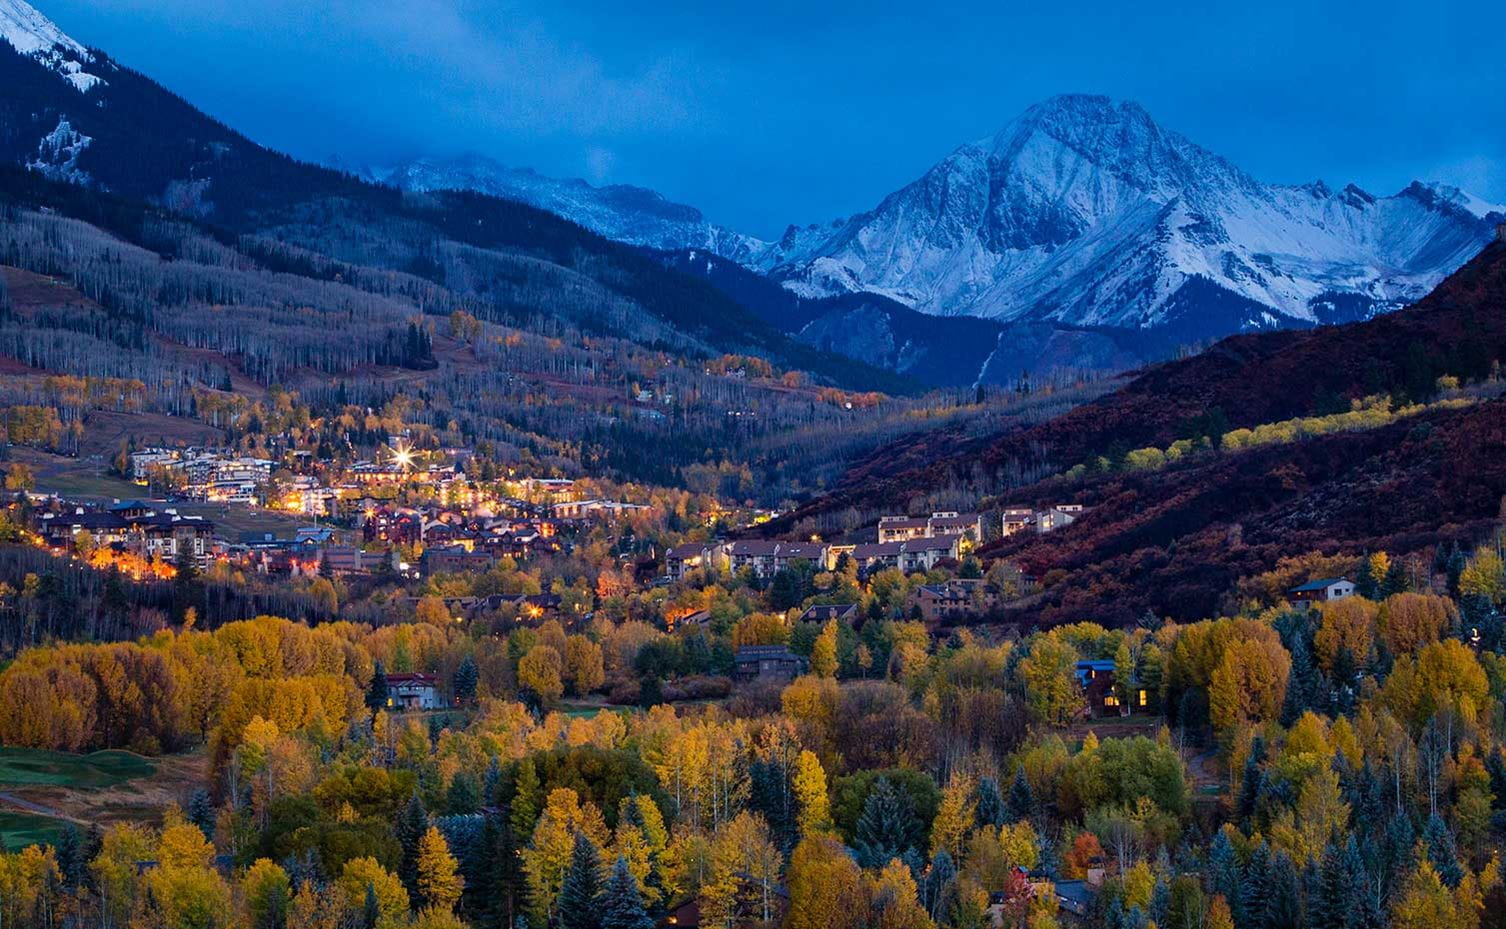 Snowmass at sundown with Mount Daly in the distance